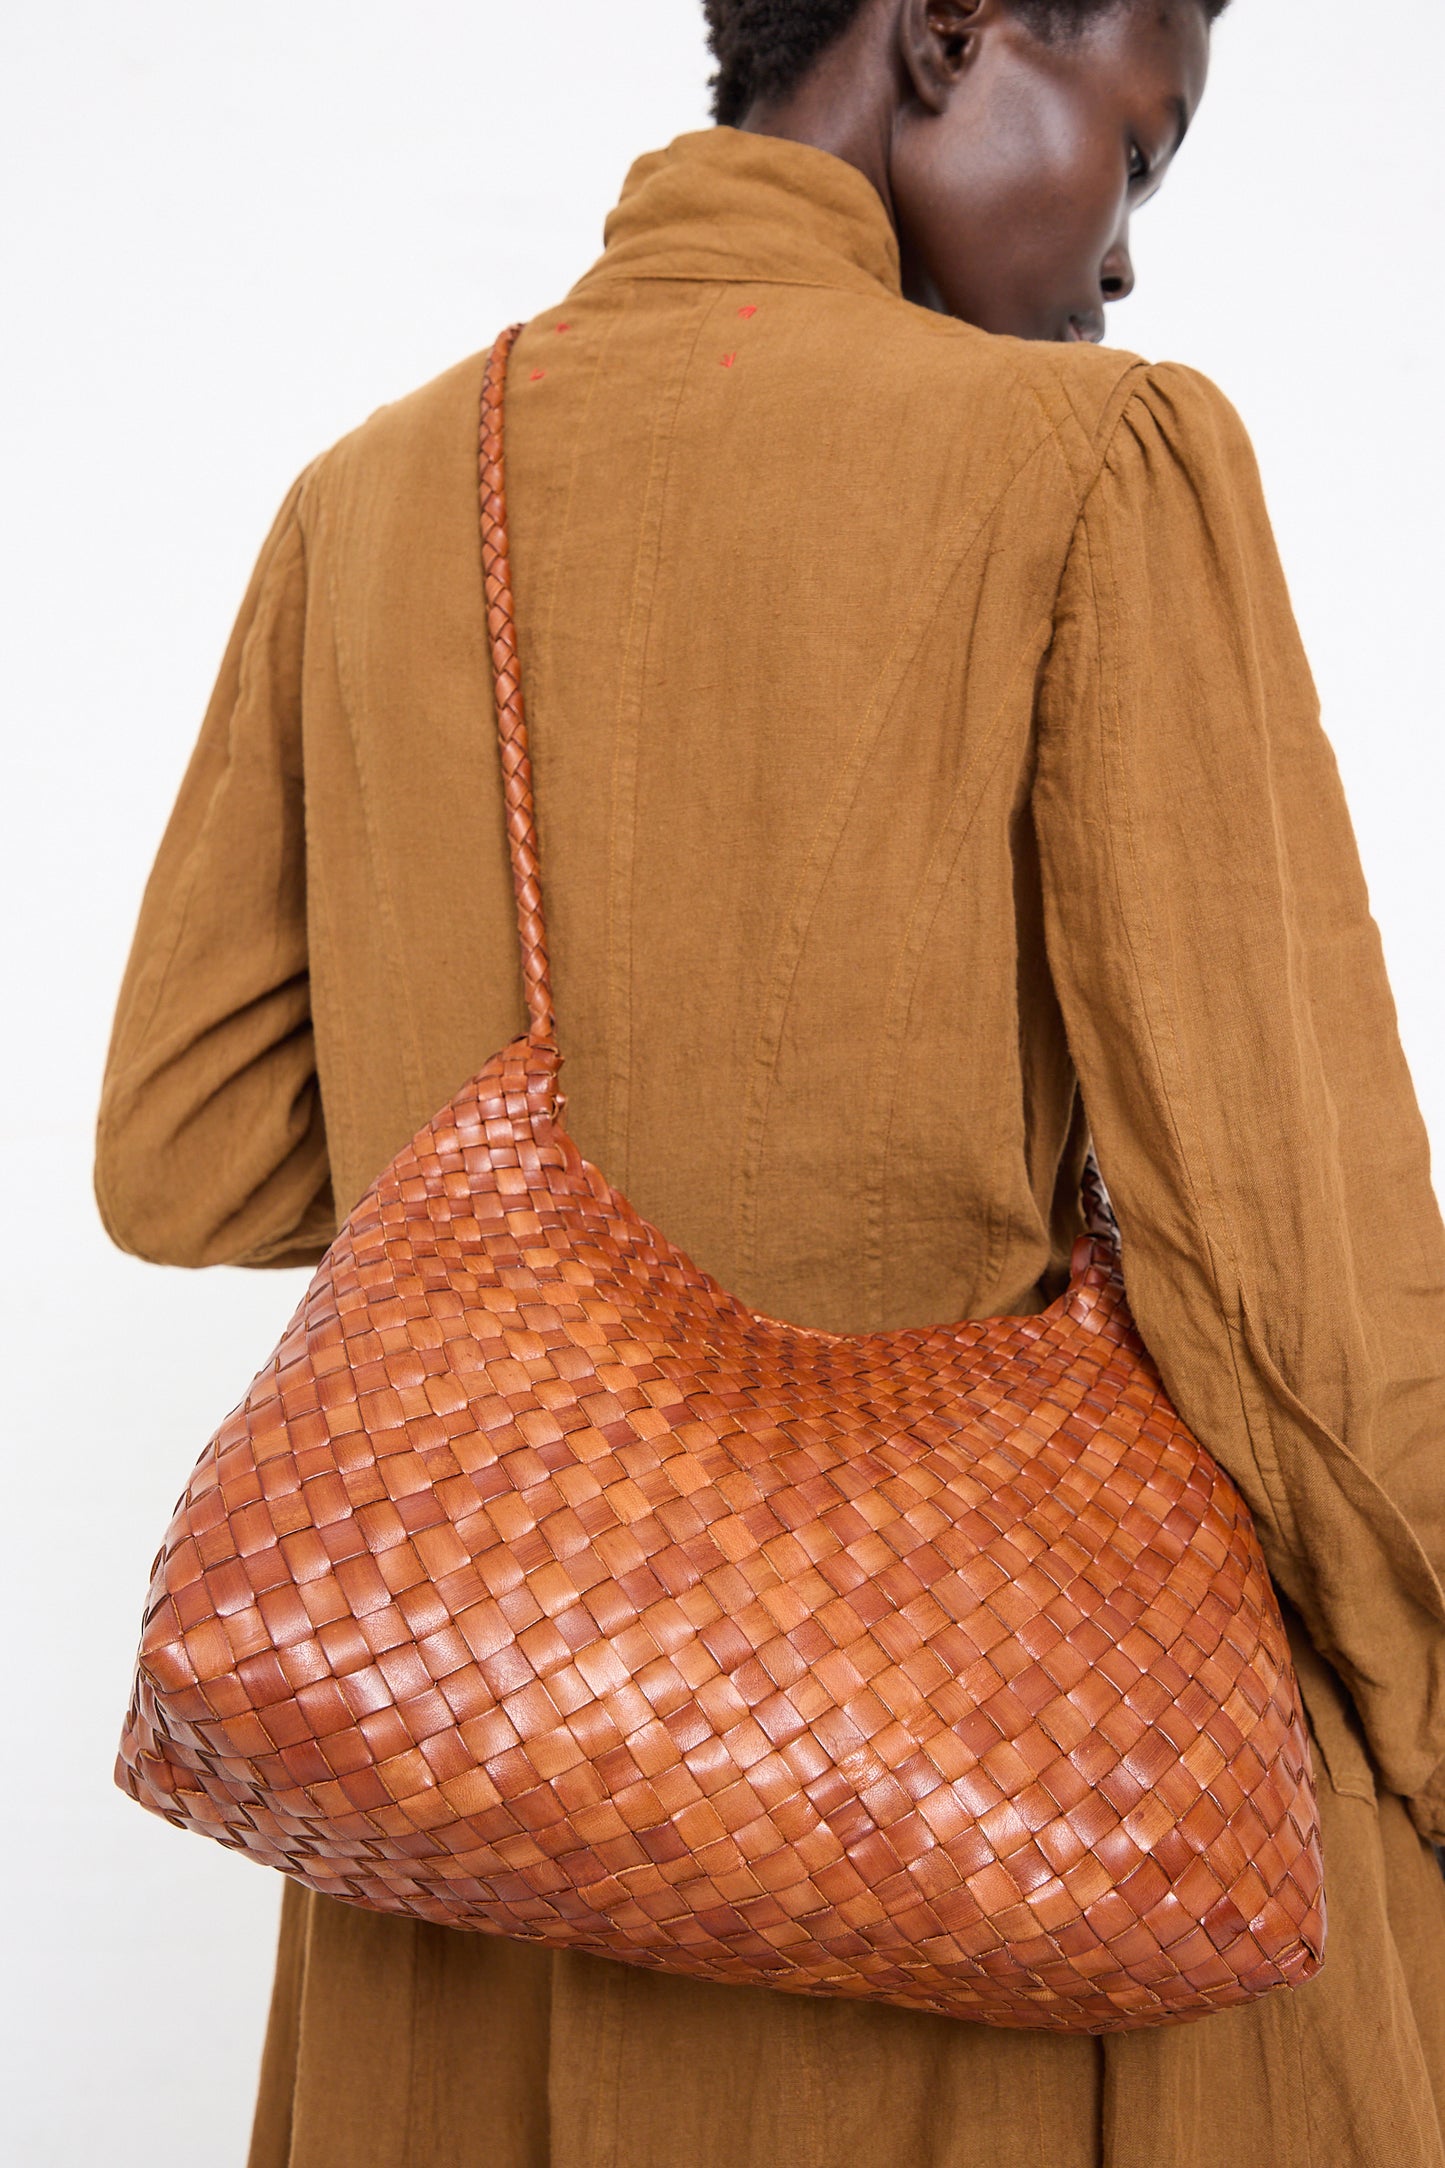 Person from behind wearing a beige jacket with a textured, oversized Dragon Diffusion Santa Rosa in Tan shoulder bag over their shoulder.